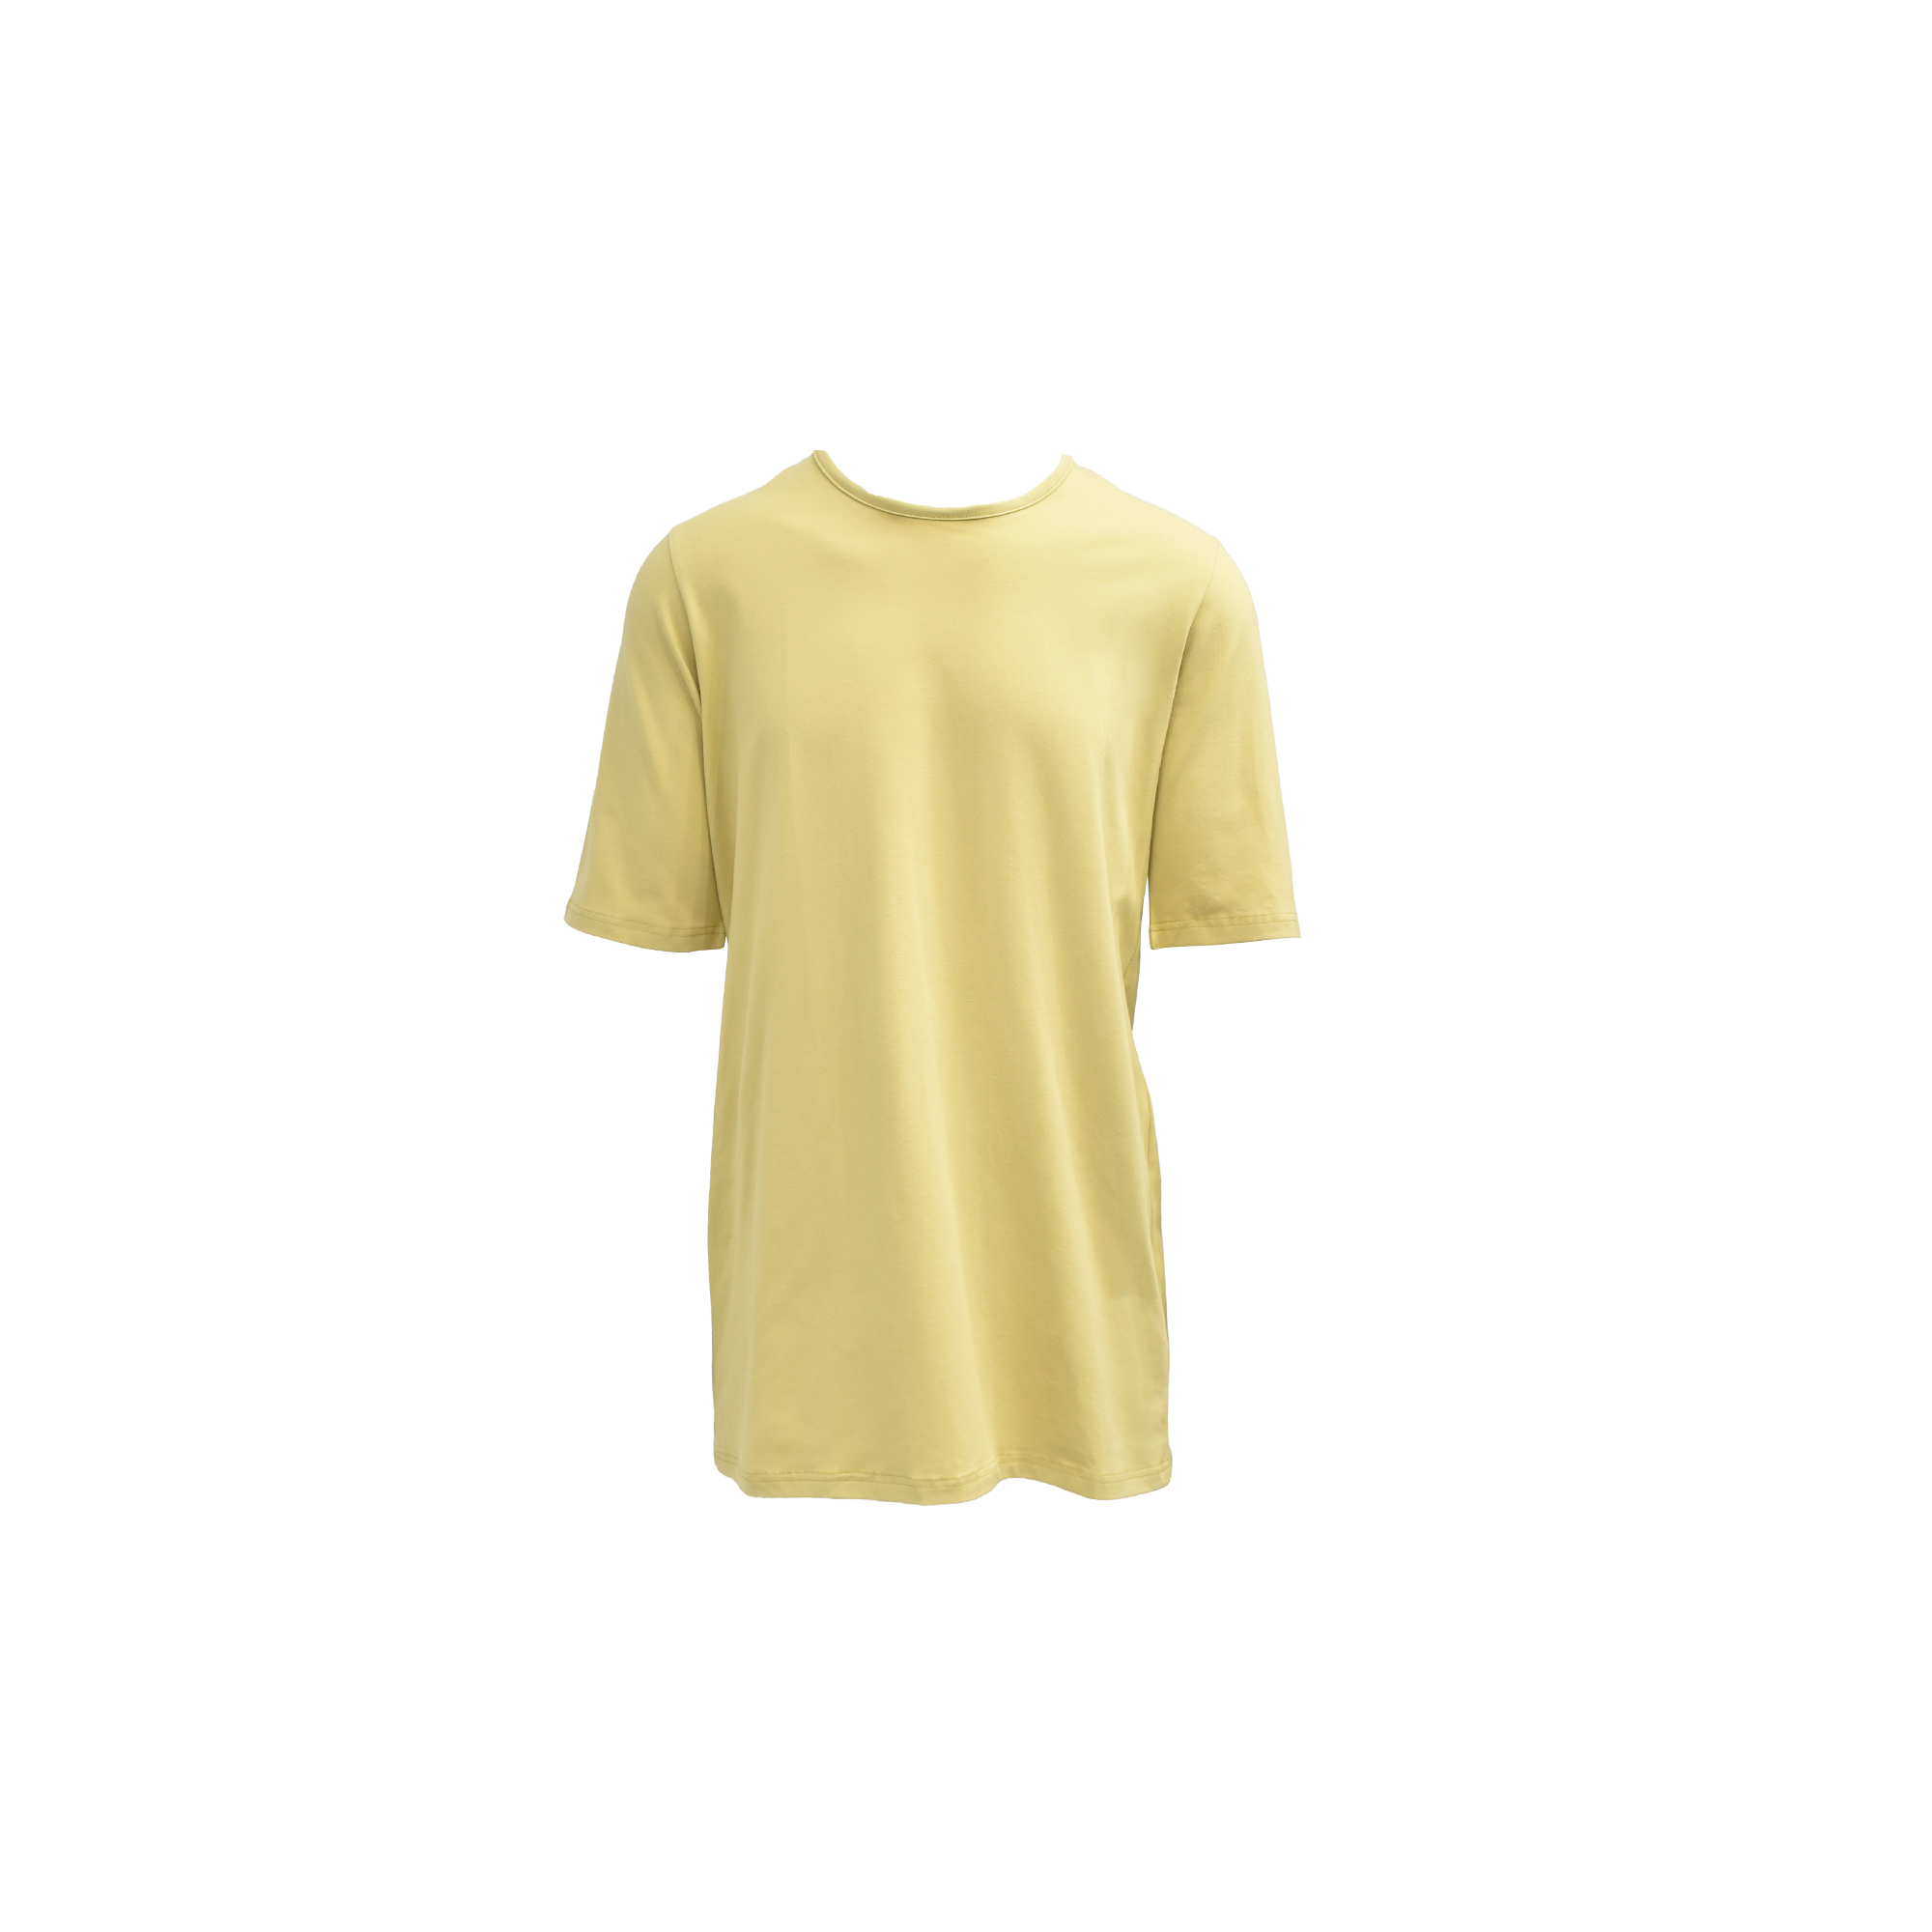 DANTE ROUTE T-SHIRT - ROUTE YELLOW